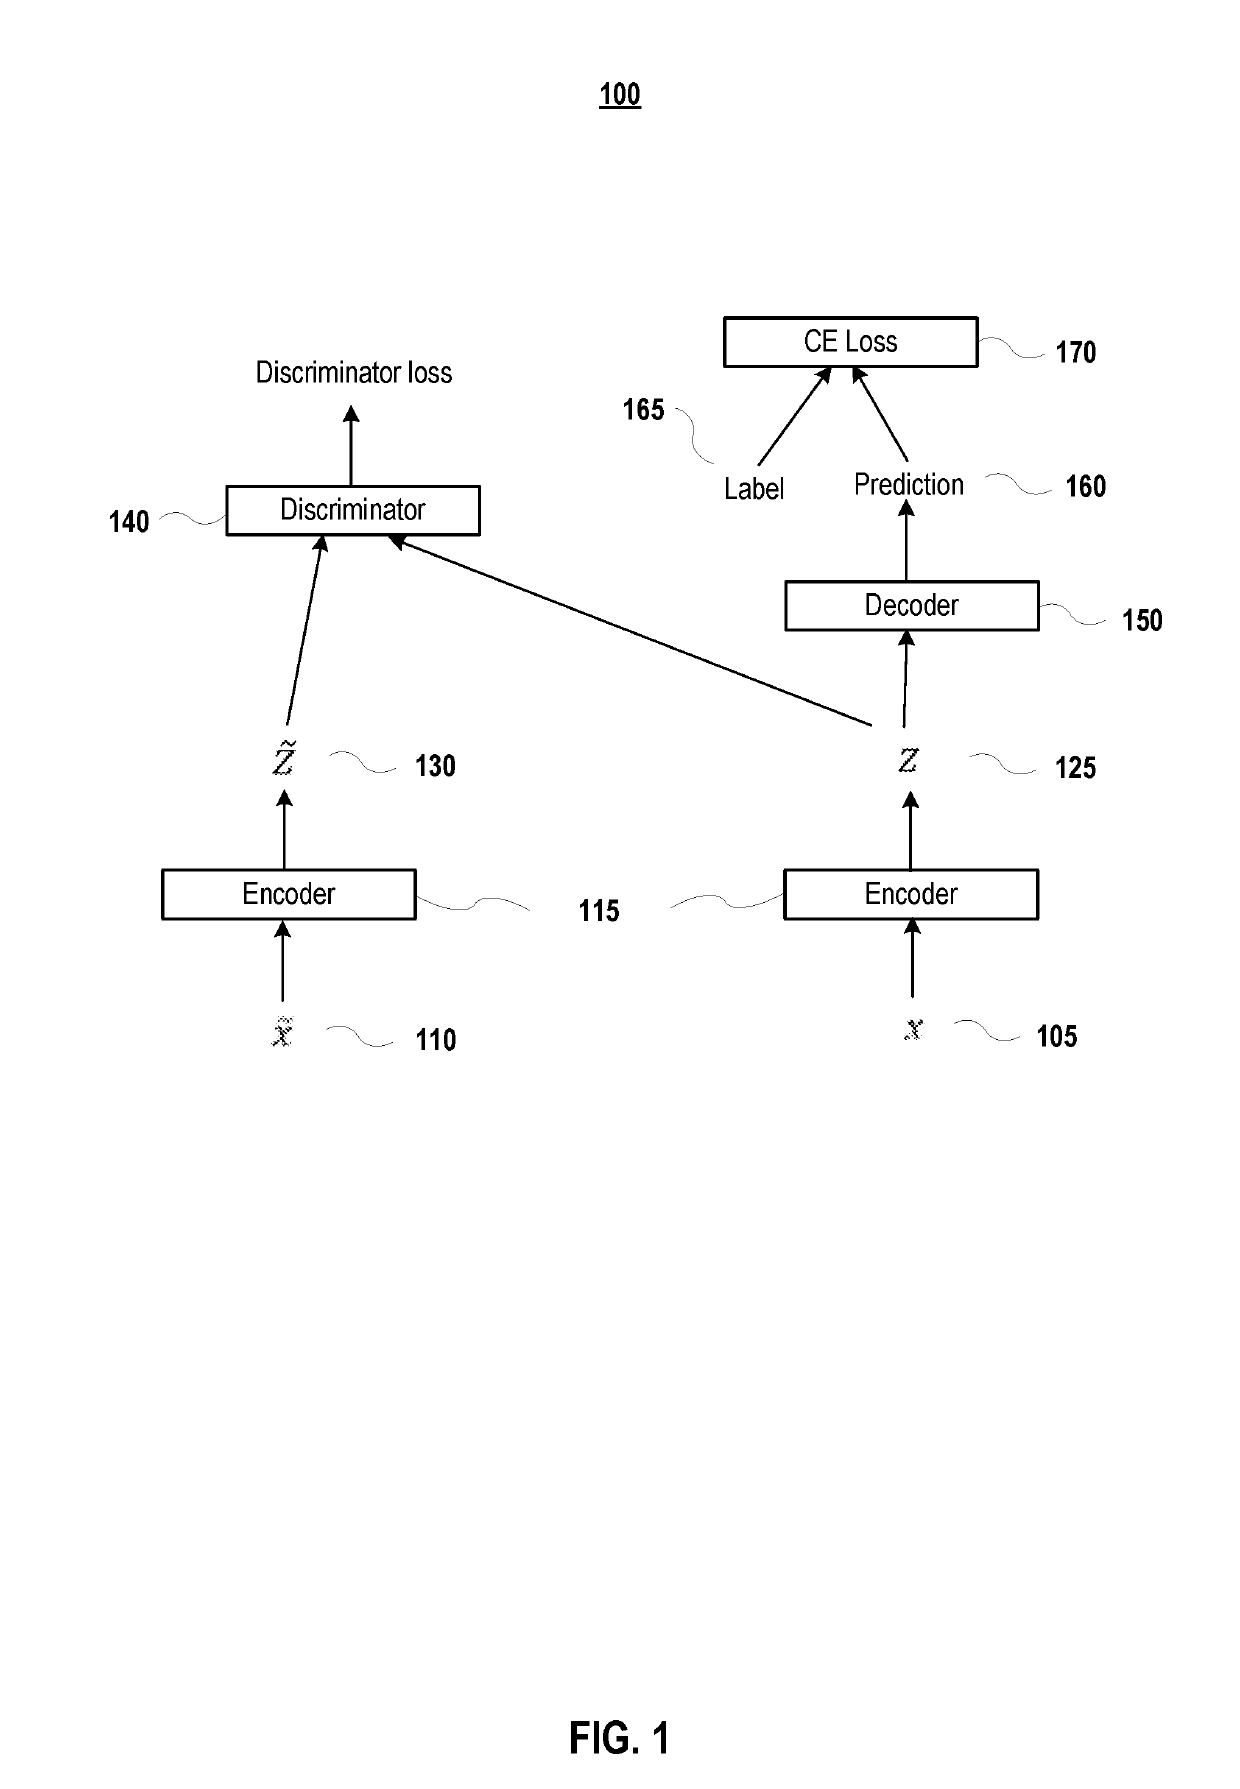 Systems and methods for robust speech recognition using generative adversarial networks